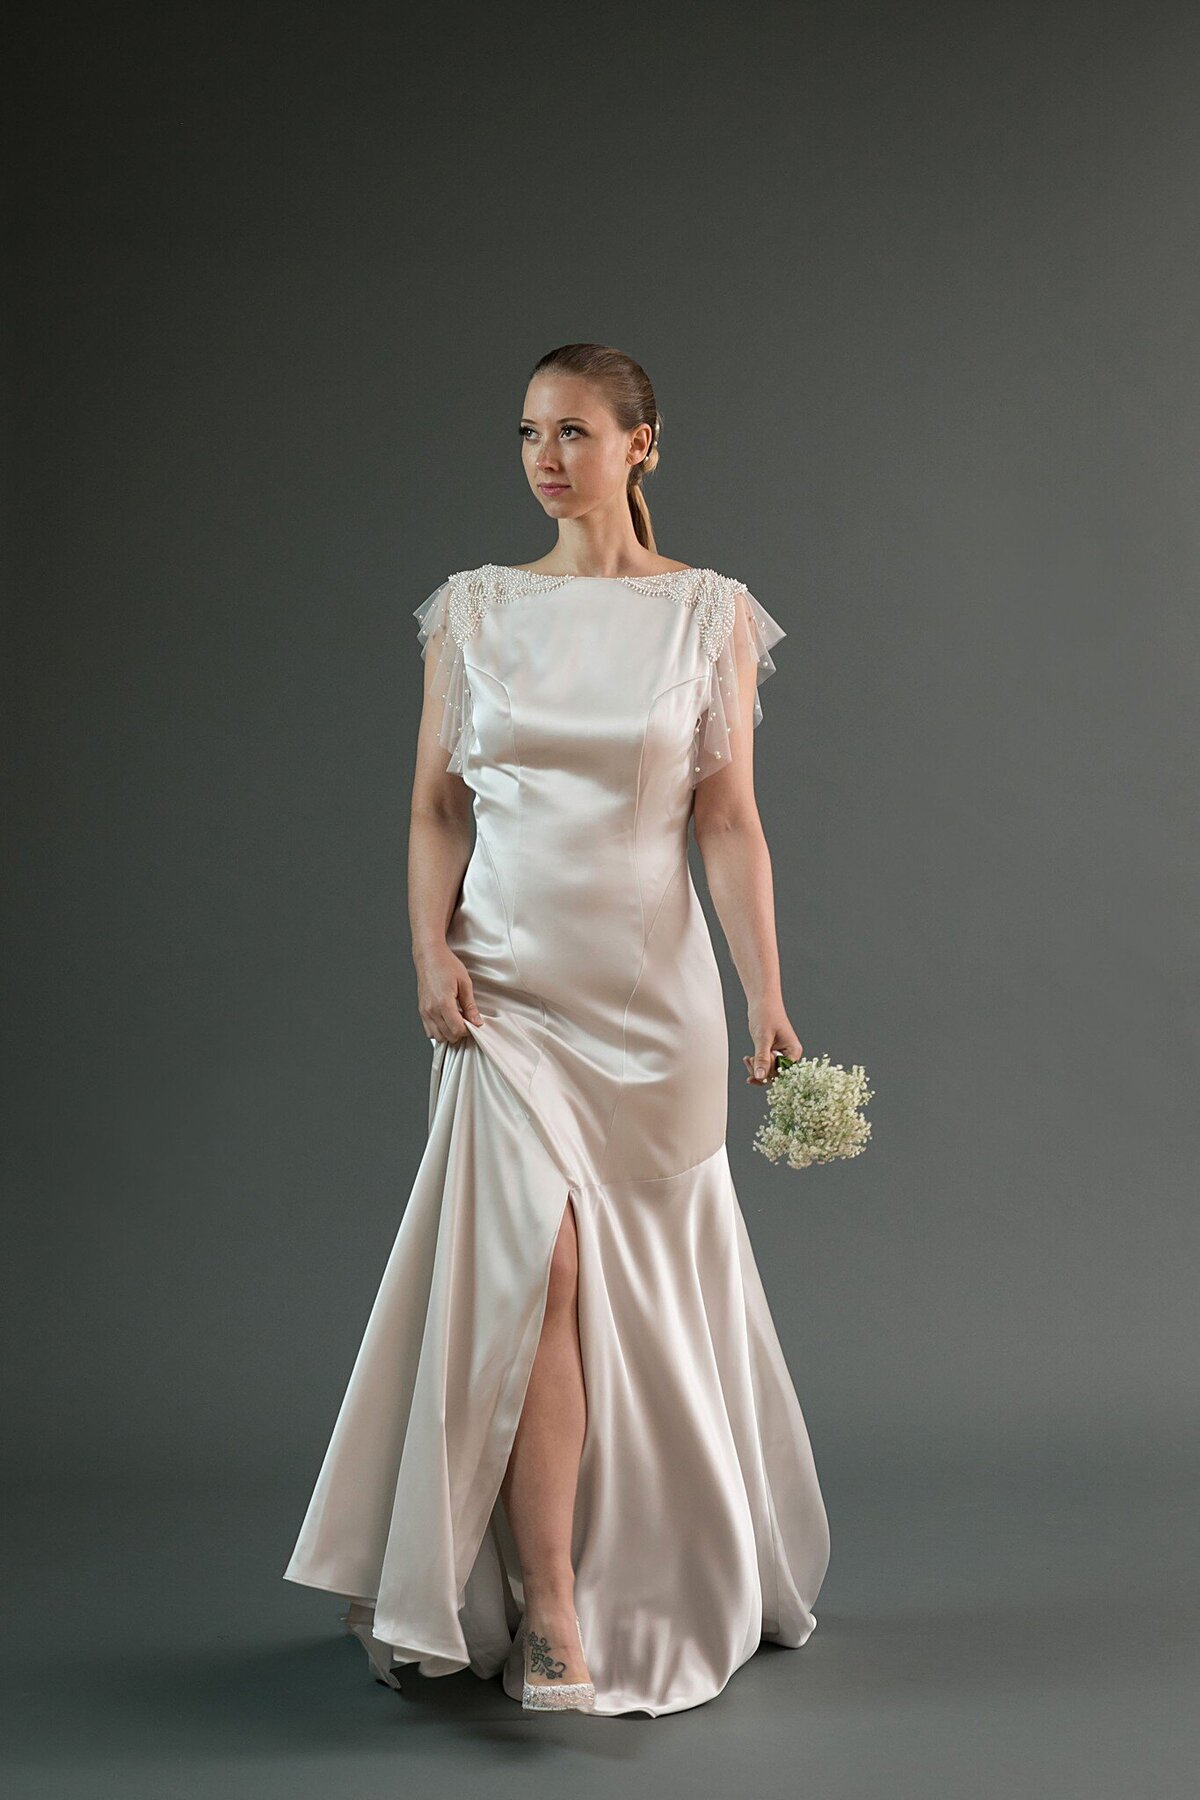 The Hana style is a slit-front, charmeuse wedding dress from Charleston bridal designer Edith Elan. It's shown in silver, but available in white.